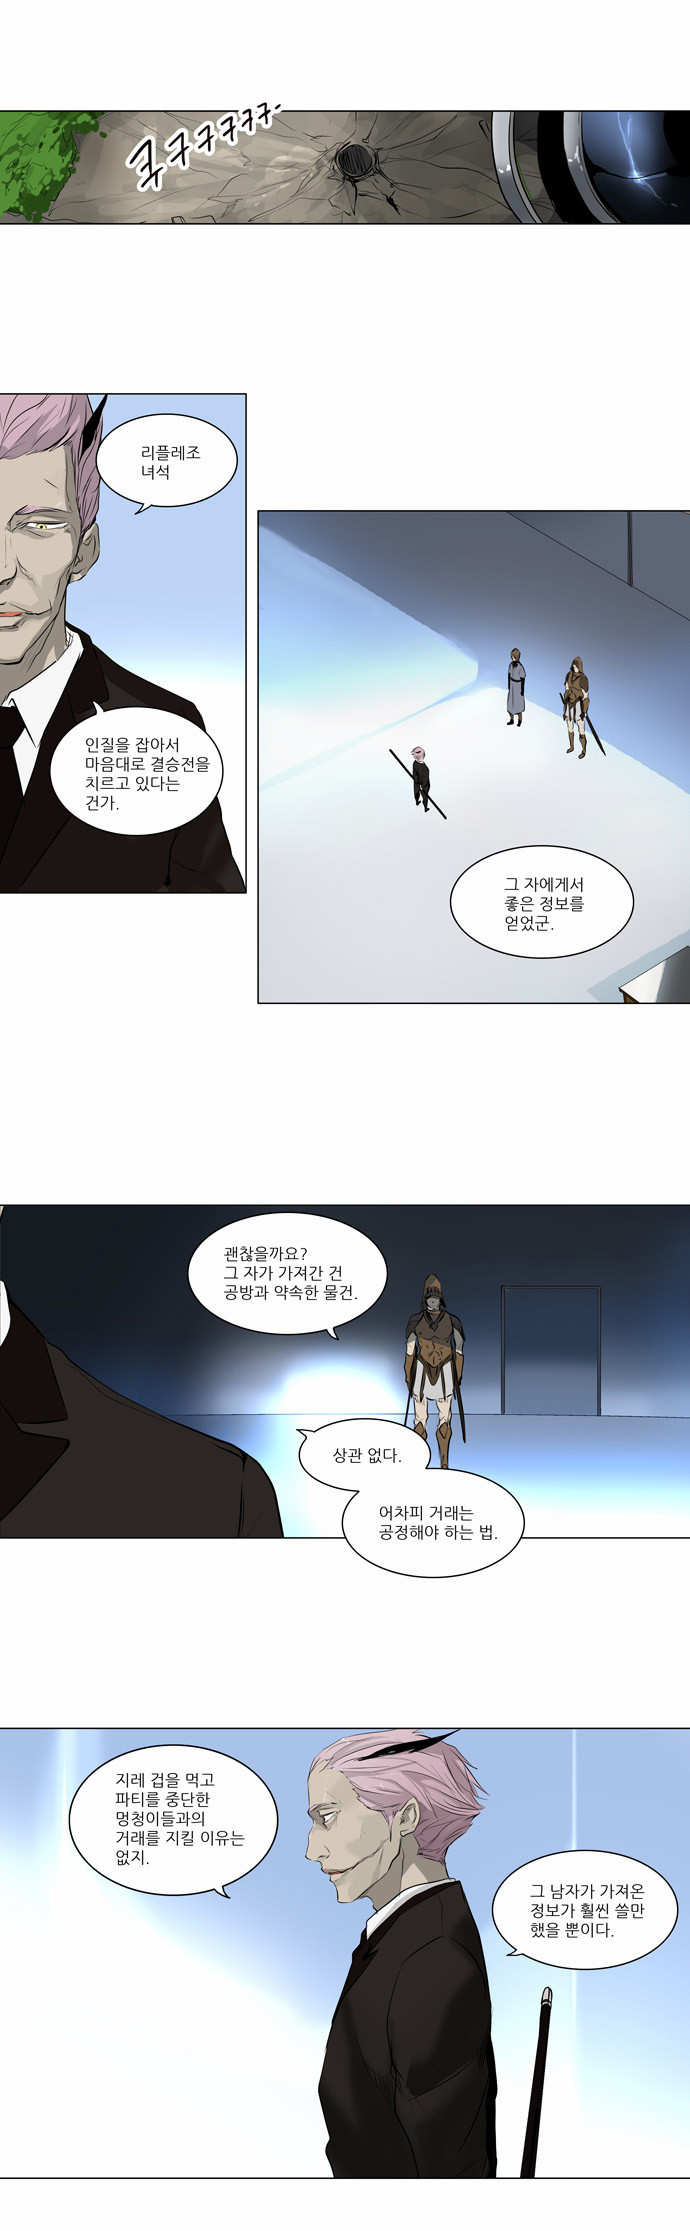 Tower of God - Chapter 183 - Page 1